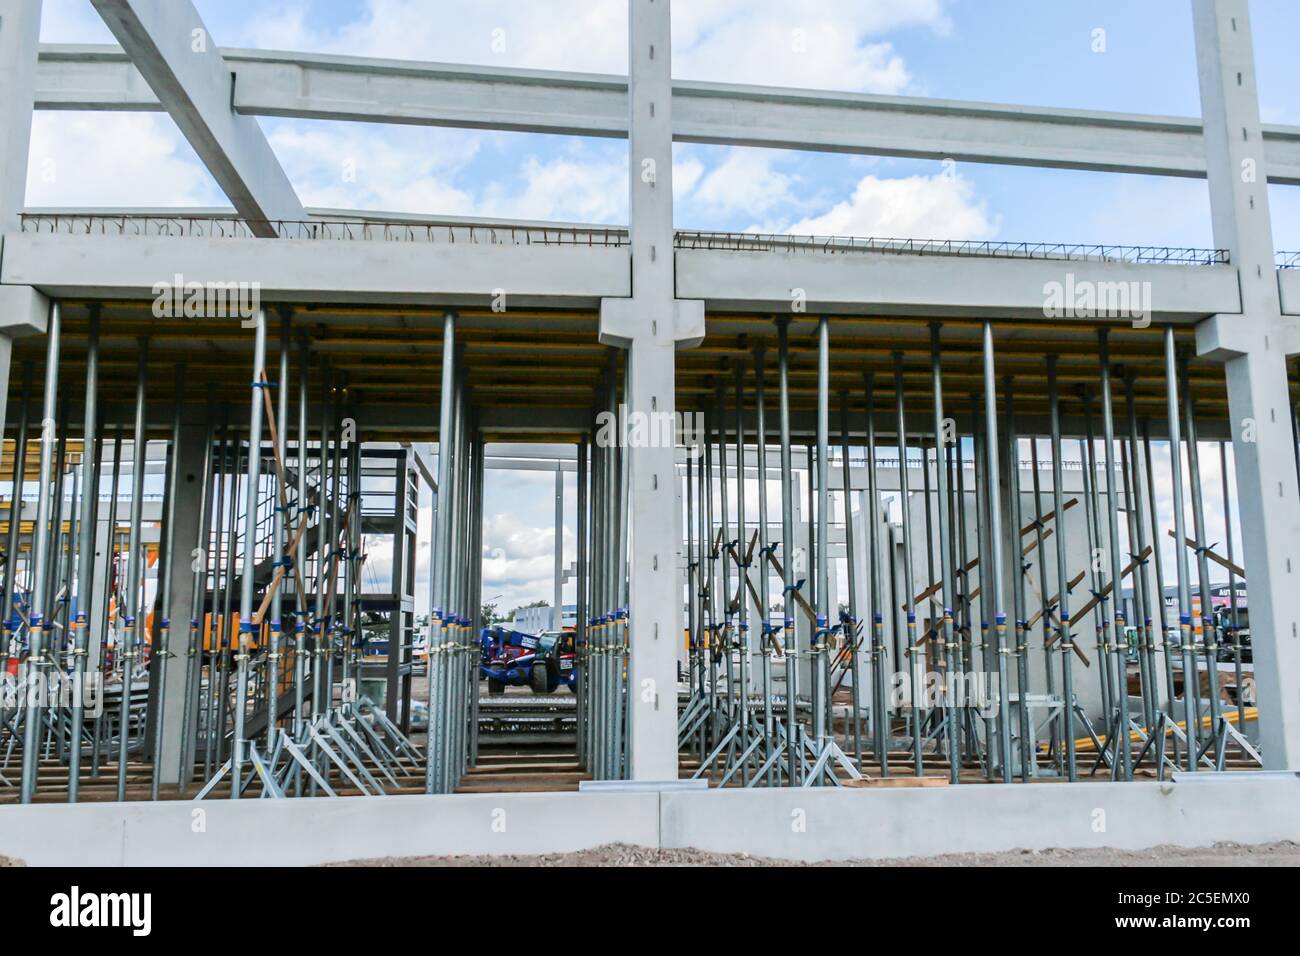 Construction site with precast concrete columns and beams Stock Photo